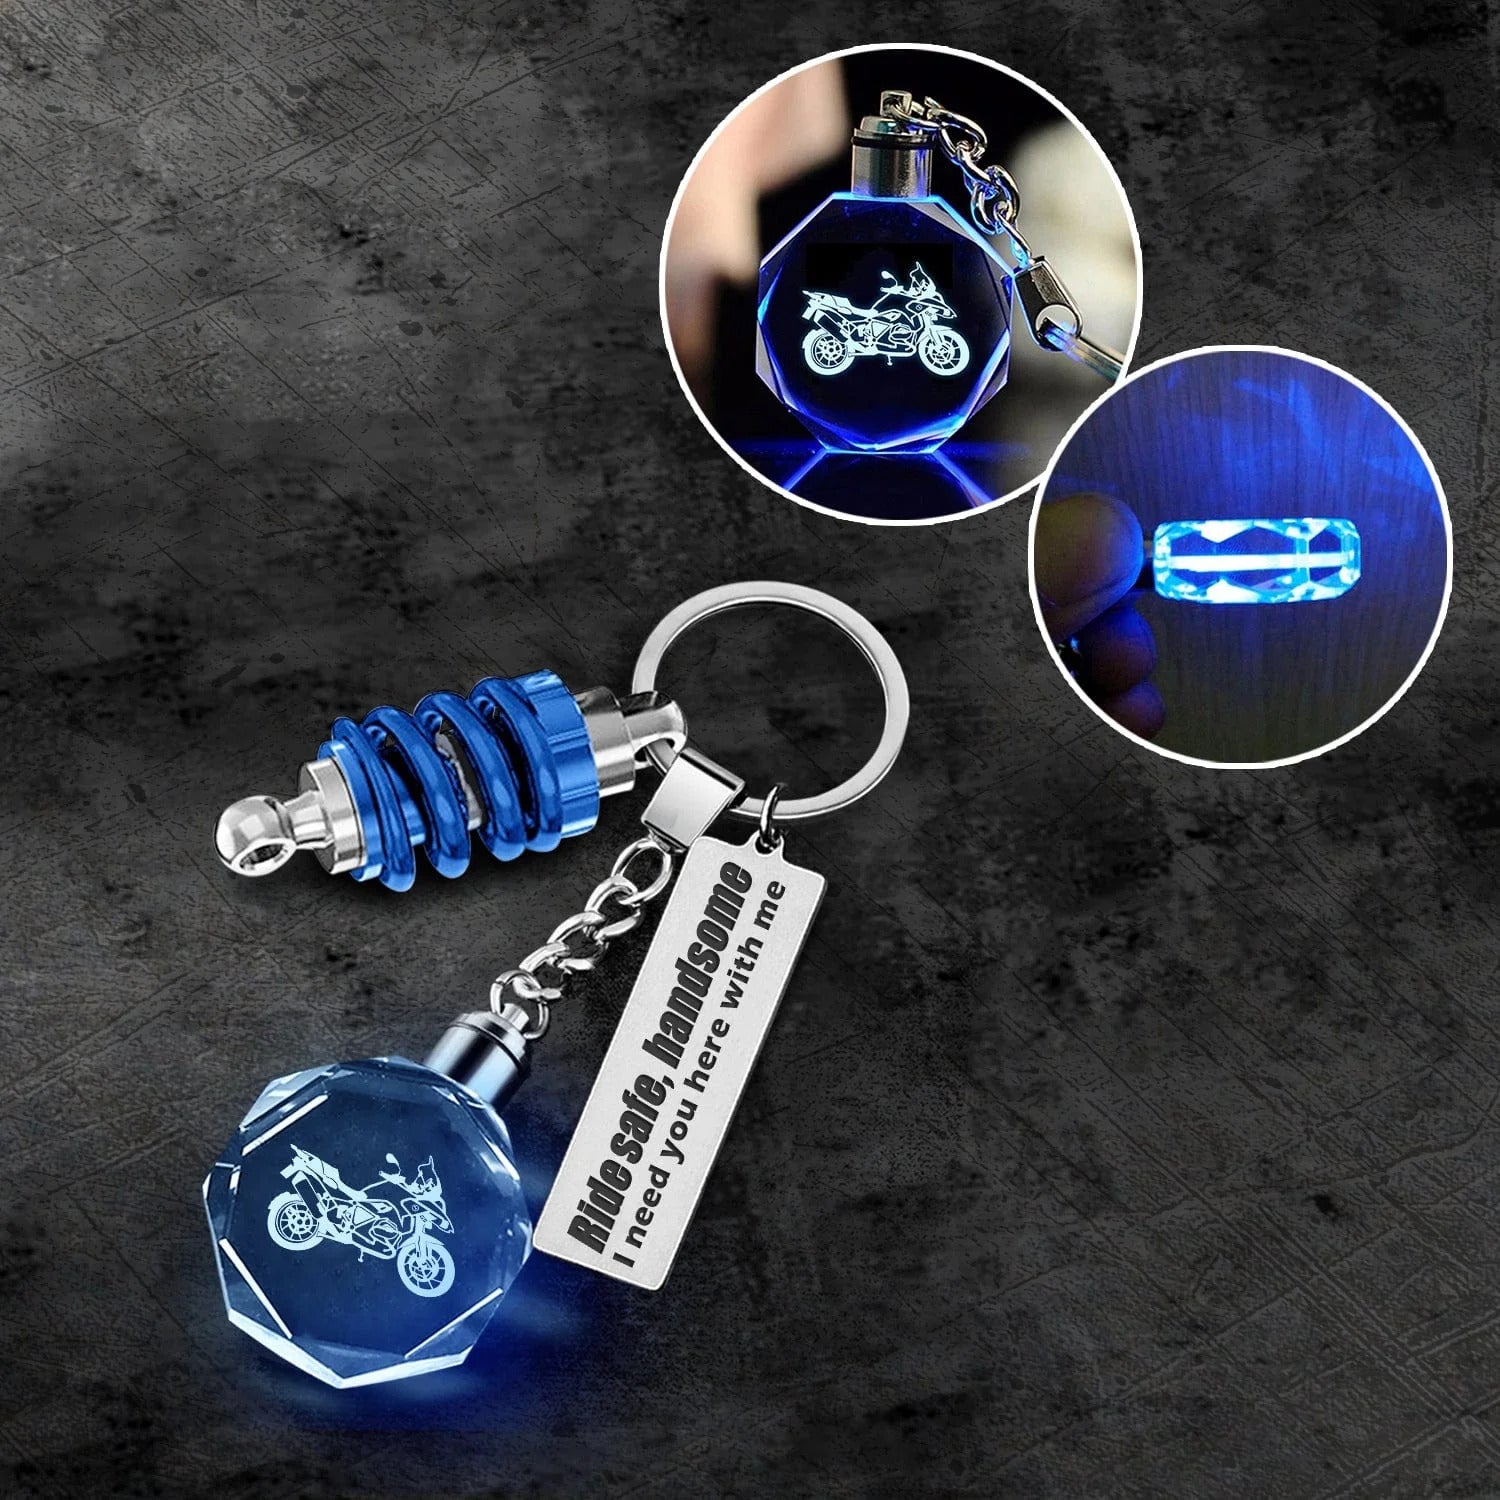 Illuminate the way with an LED light motorcycle keychain